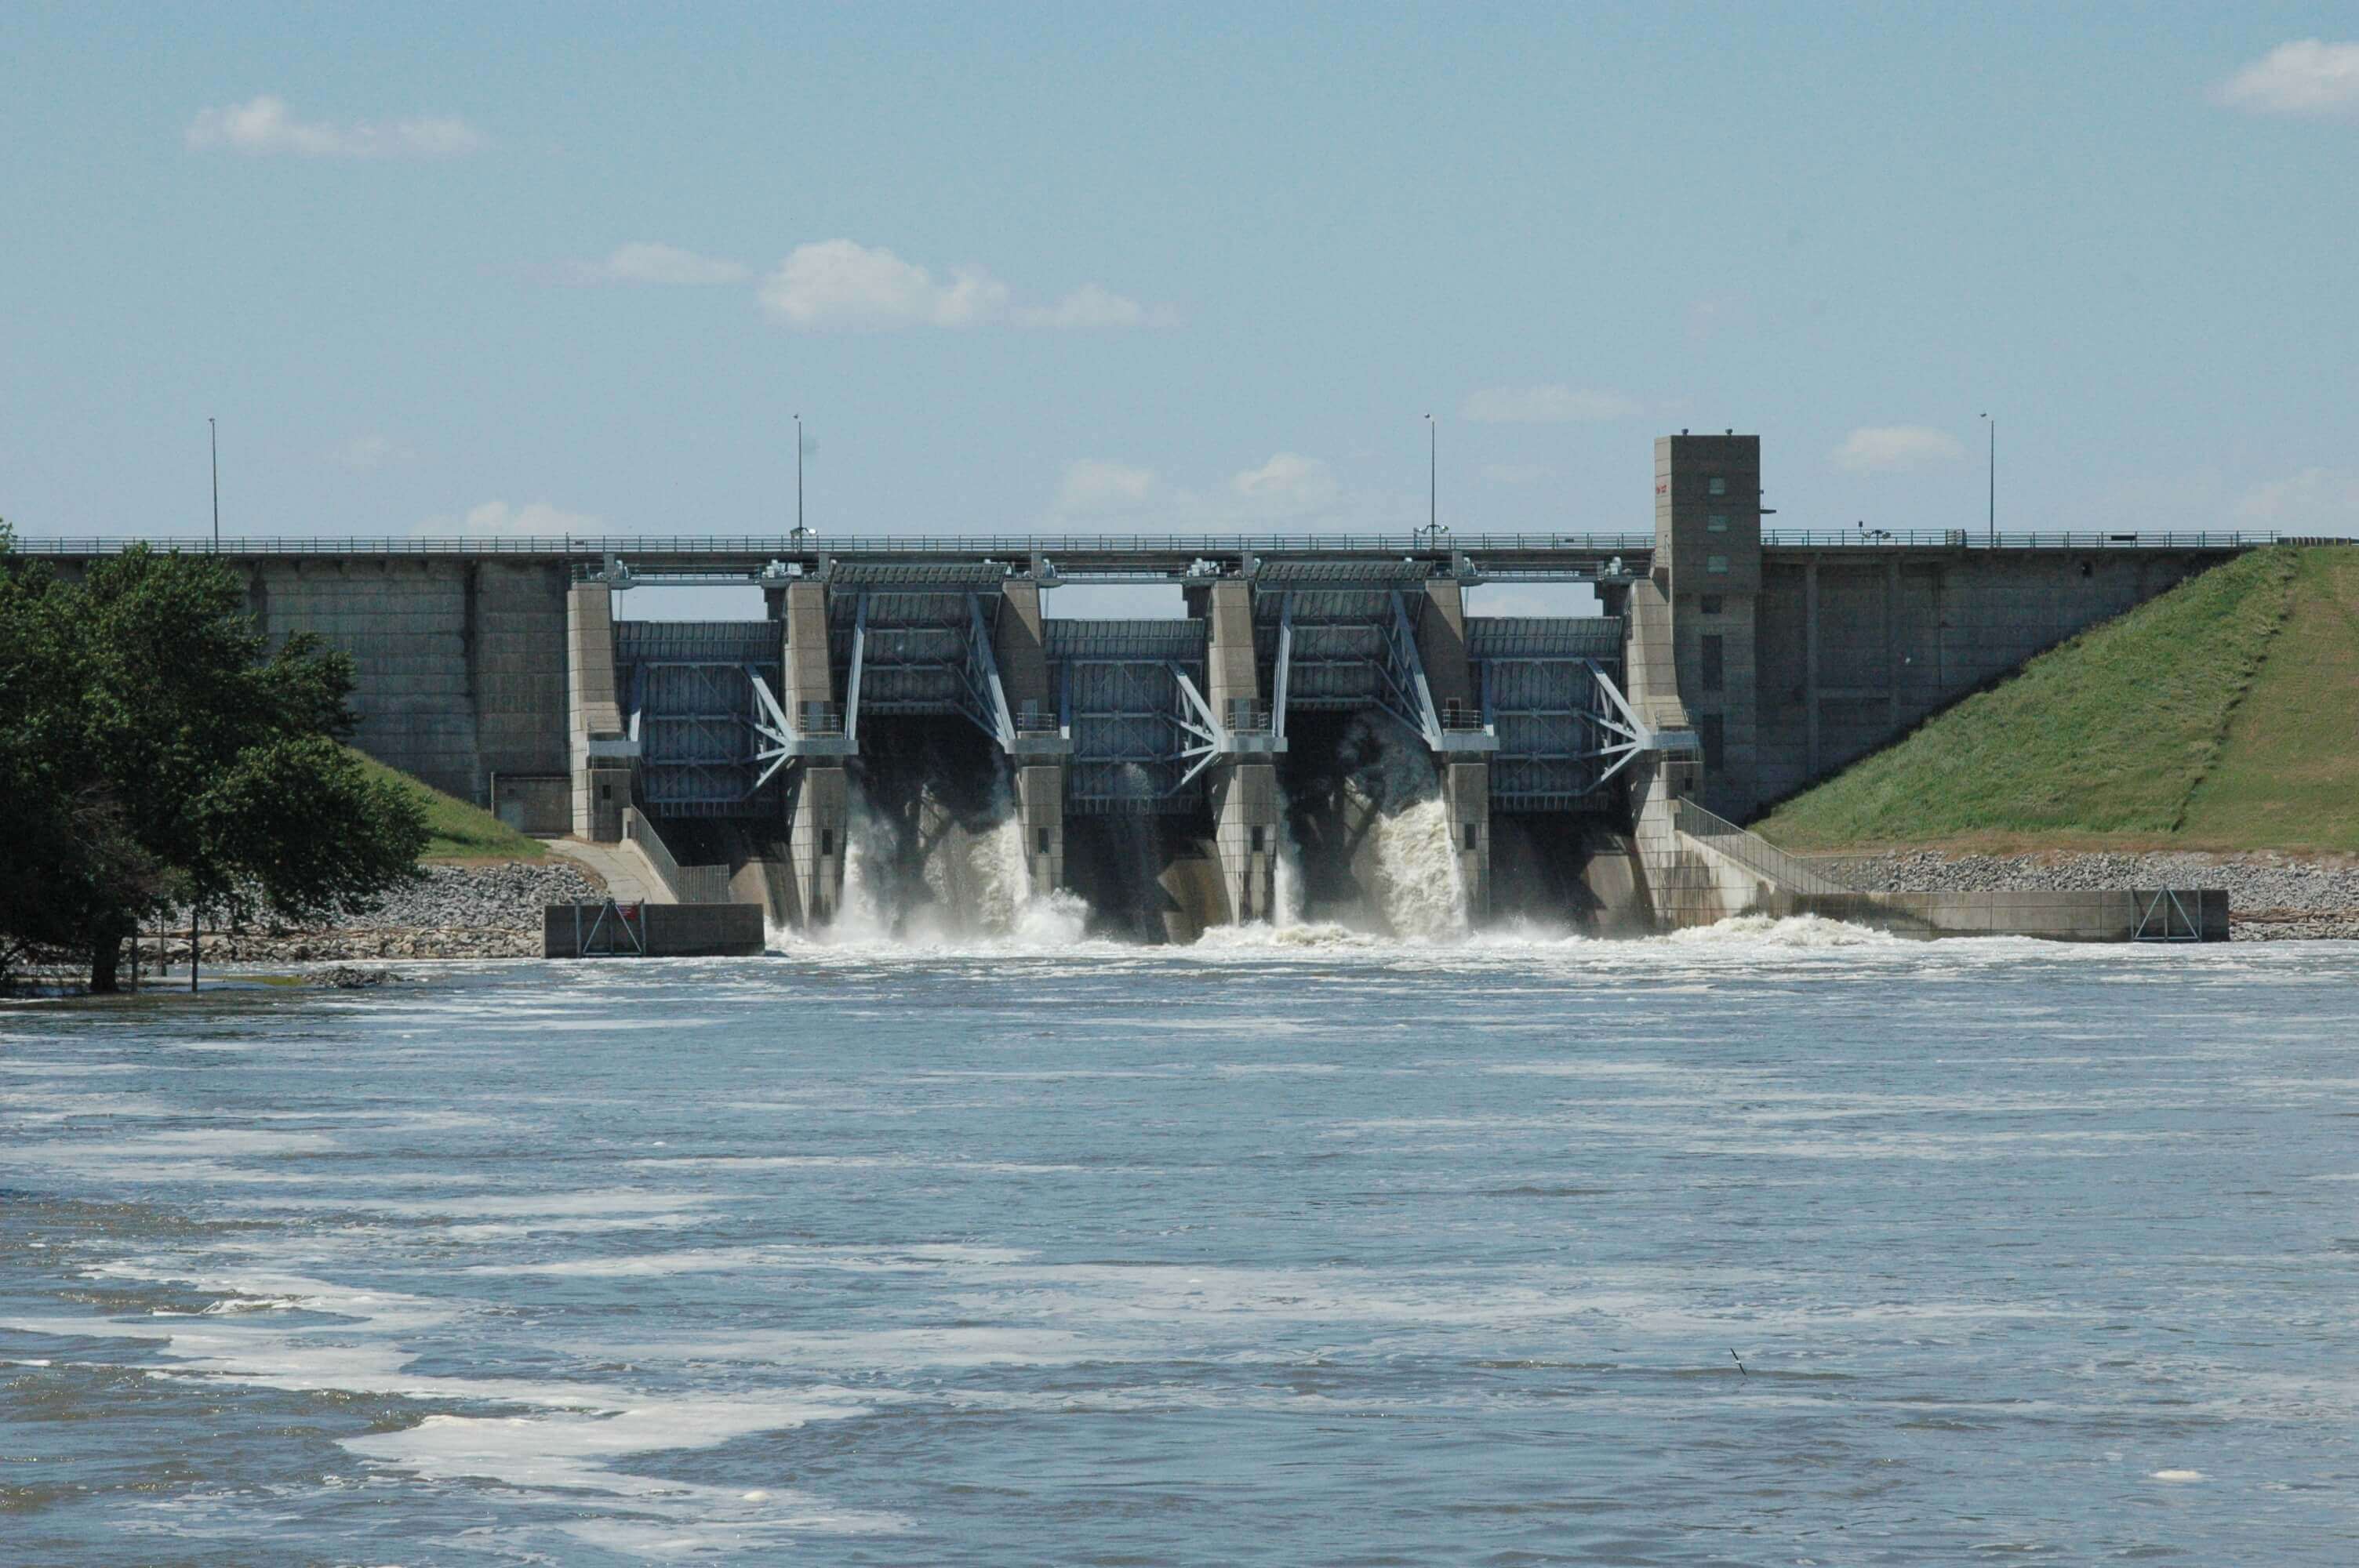 Water flows through the radial gates at Lake Red Rock during high water. Reservoir outflows and impounded water in the pool influence fish, mussels, and other wildlife that depend on the river’s aquatic, riparian, and floodplain habitats.